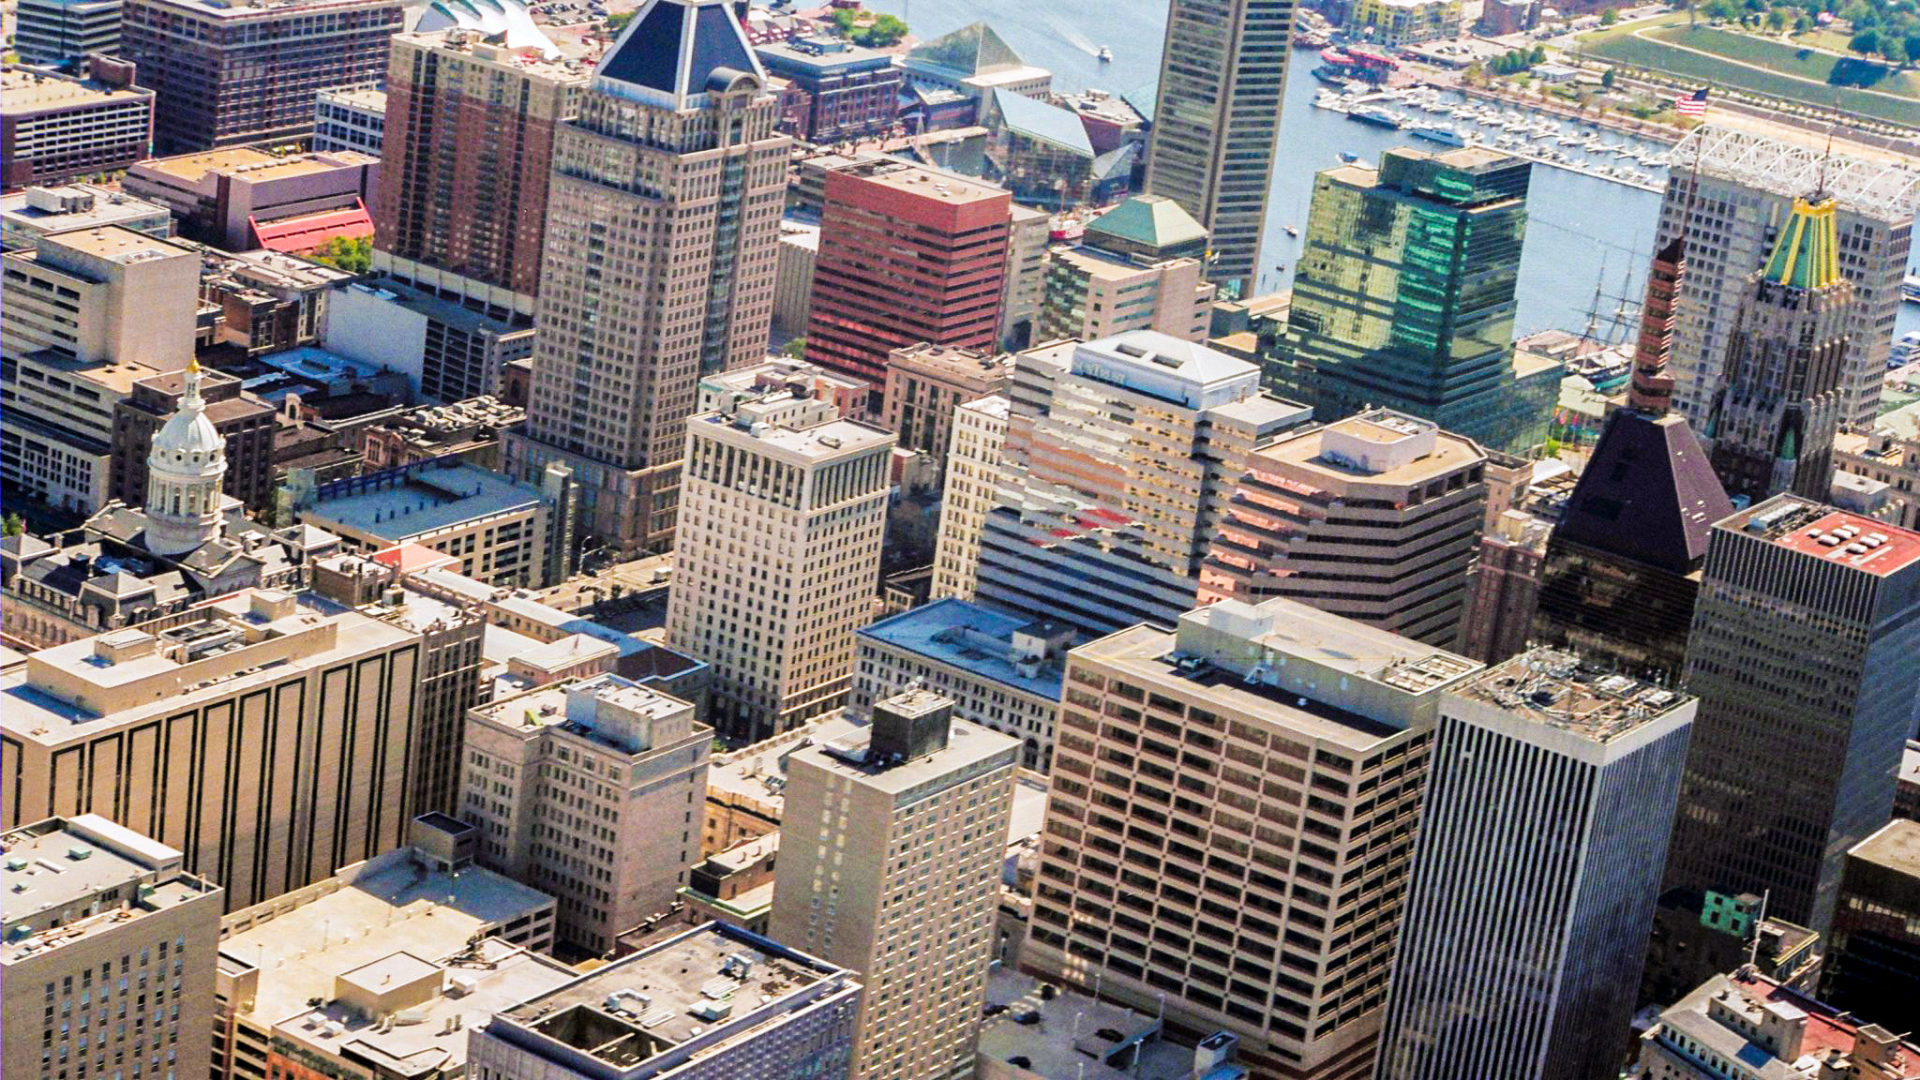 Aerial view of Downtown Baltimore's Central Business District (CBD).